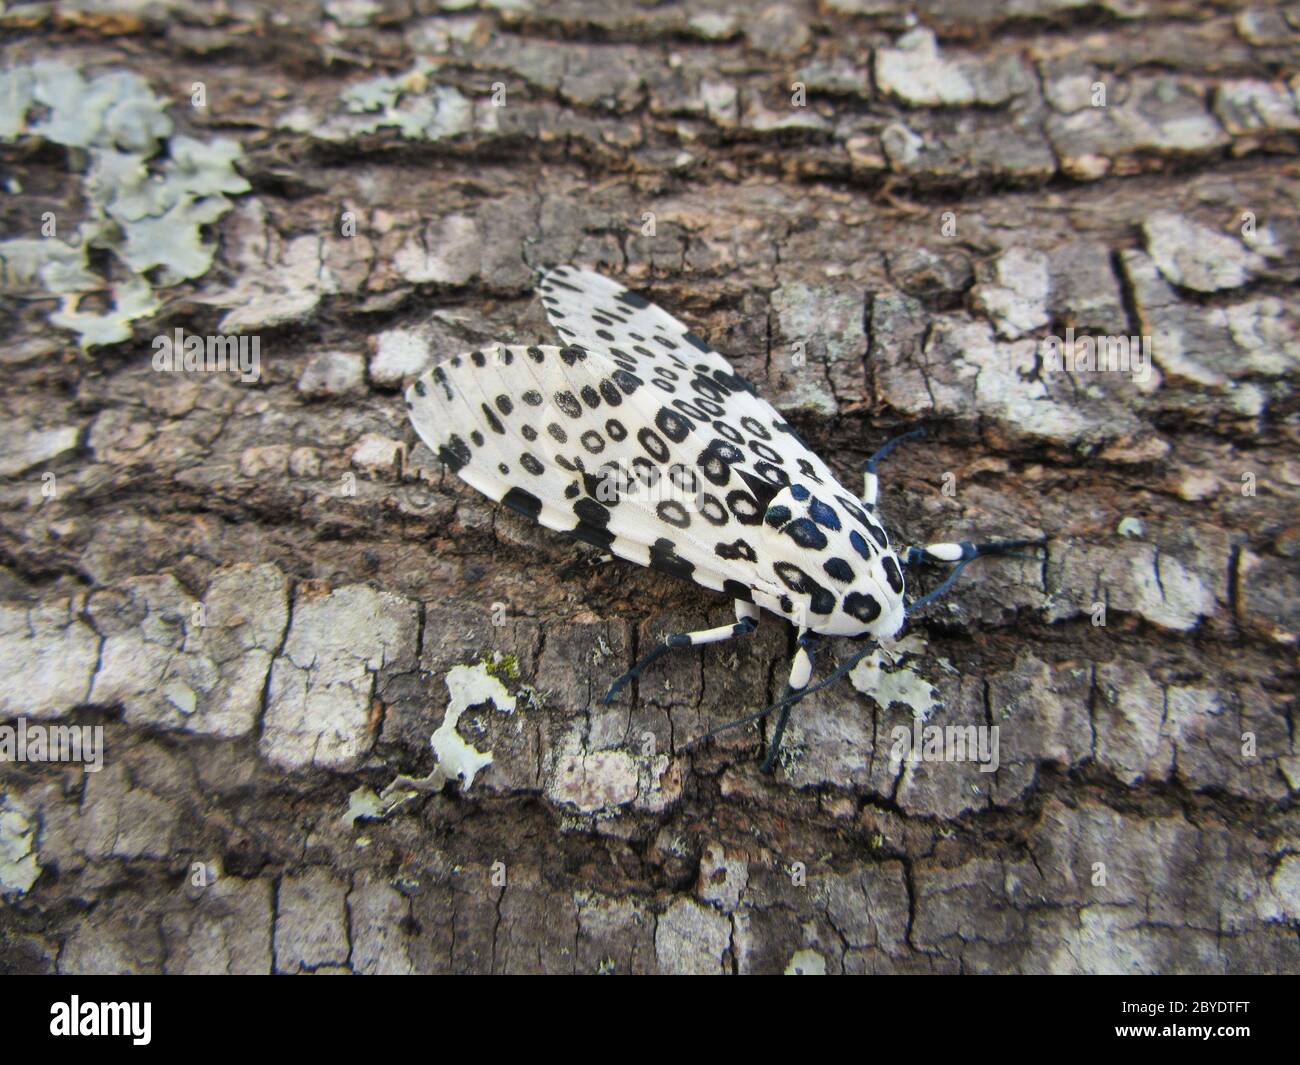 Closeup of a characteristically spotted giant leopard moth on the bark of a tree Stock Photo